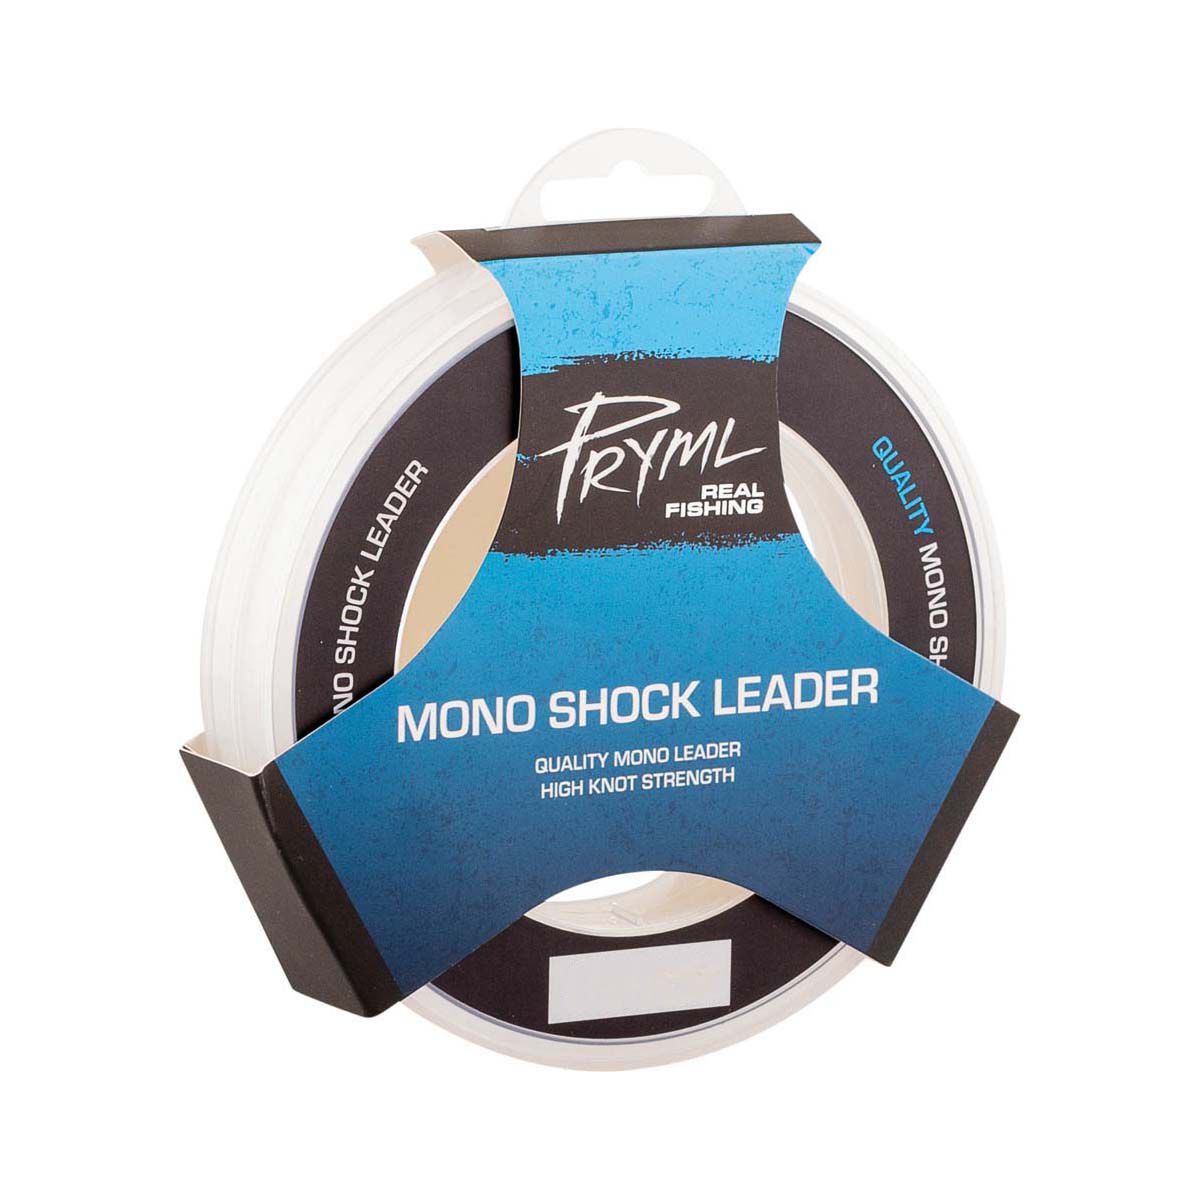  ThornsLine Force Monofilament Fishing Line - Superior Saltwater  Mono Leader Materials - Exceptional Strength Nylon Fishing Line 2-100lb,  Abrasion Resistant Mono Line